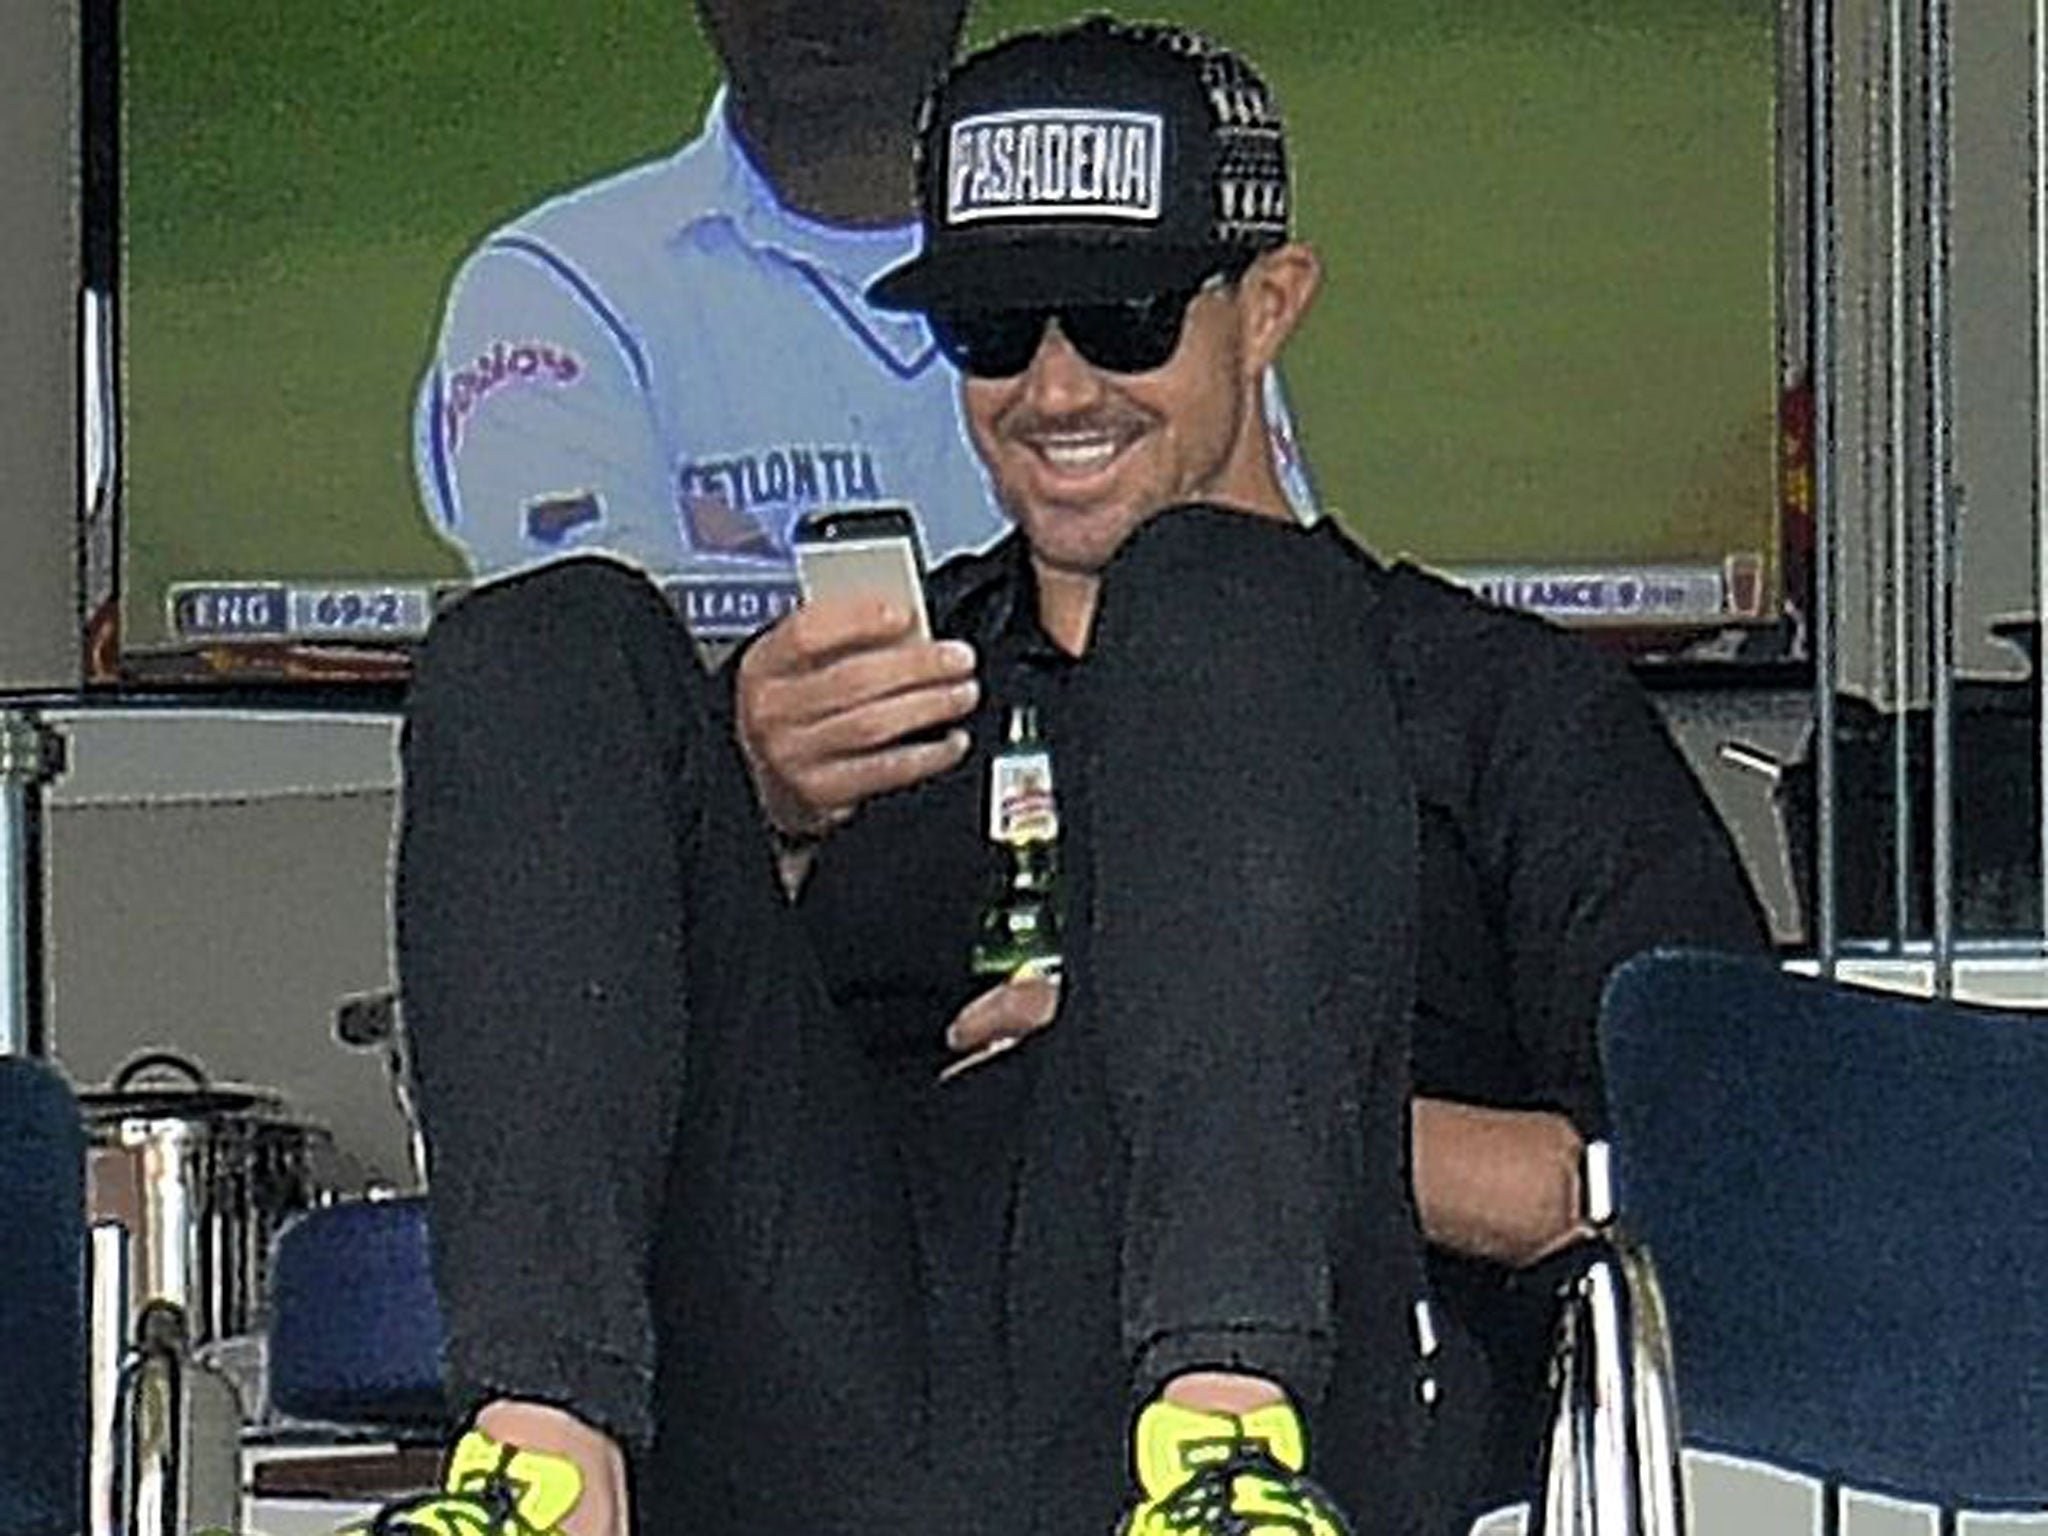 Kevin Pietersen at Lord’s on Sunday